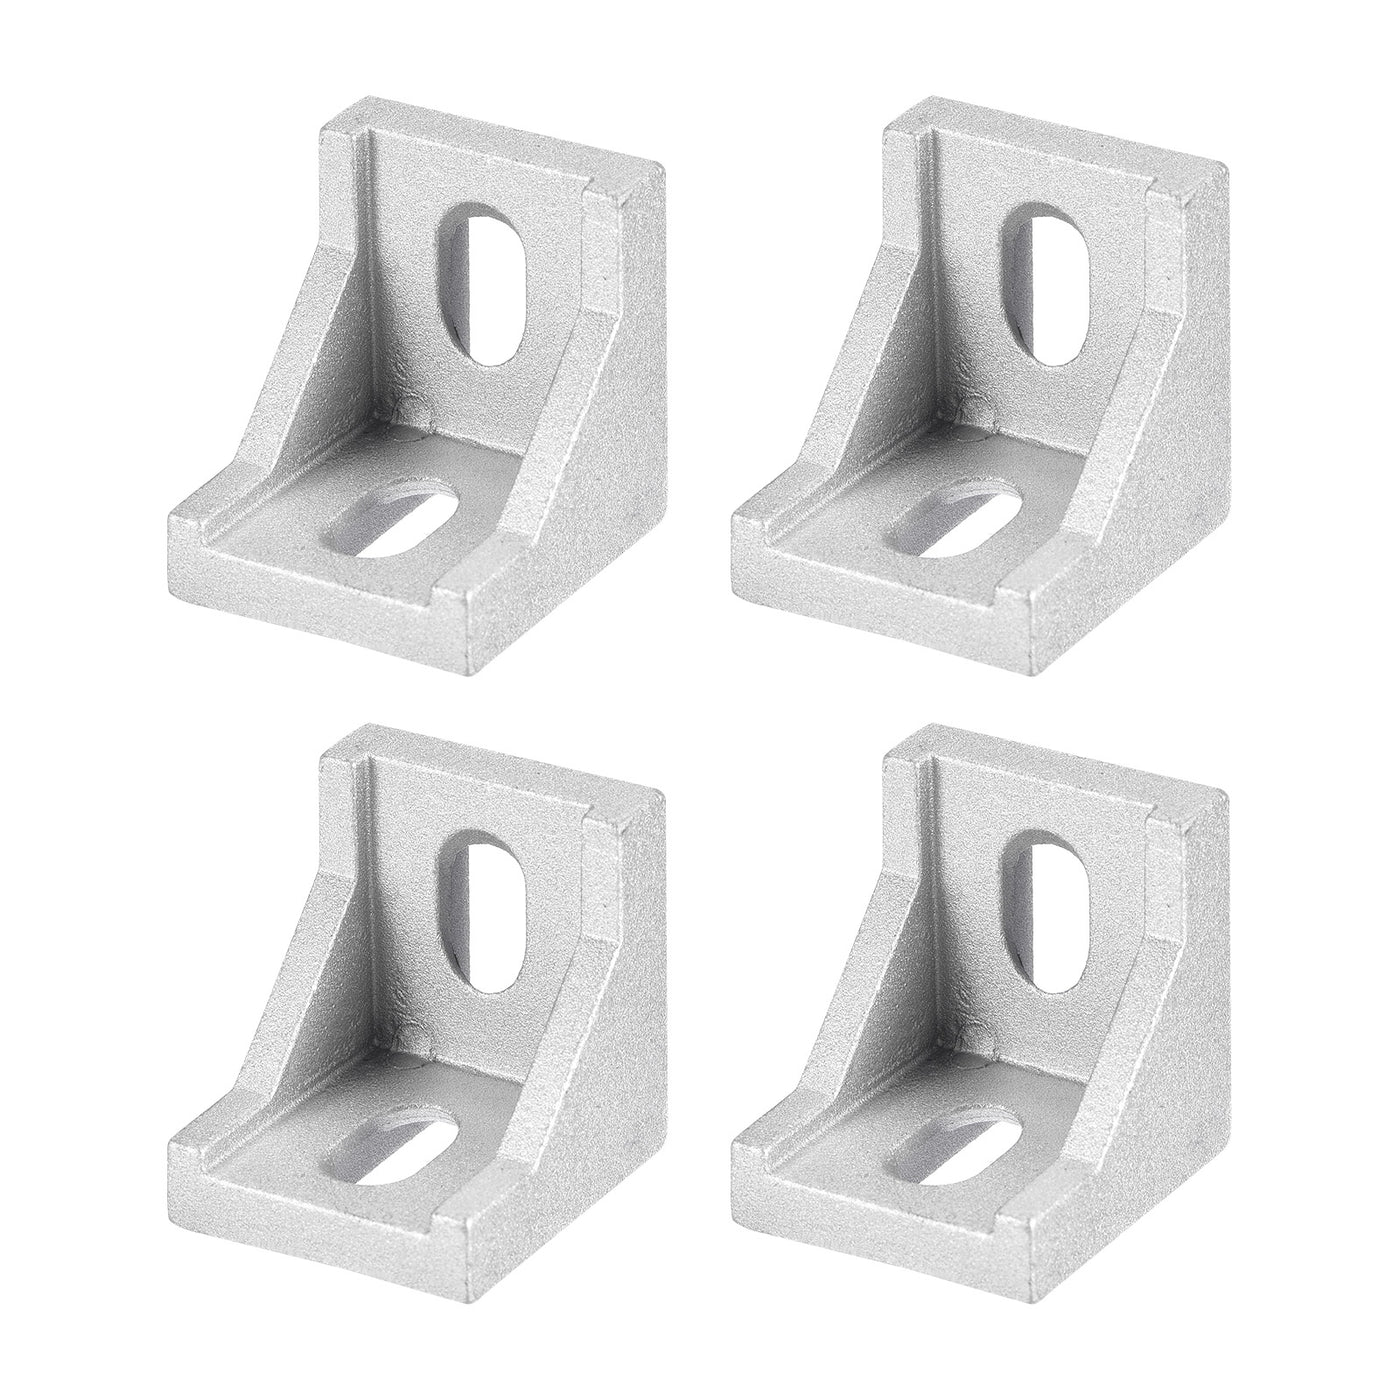 uxcell Uxcell 4Pcs Inside Corner Bracket Gusset, 38x38x35mm 4040 Thicken Angle Connectors for 4040/4080 Series Aluminum Extrusion Profile Silver